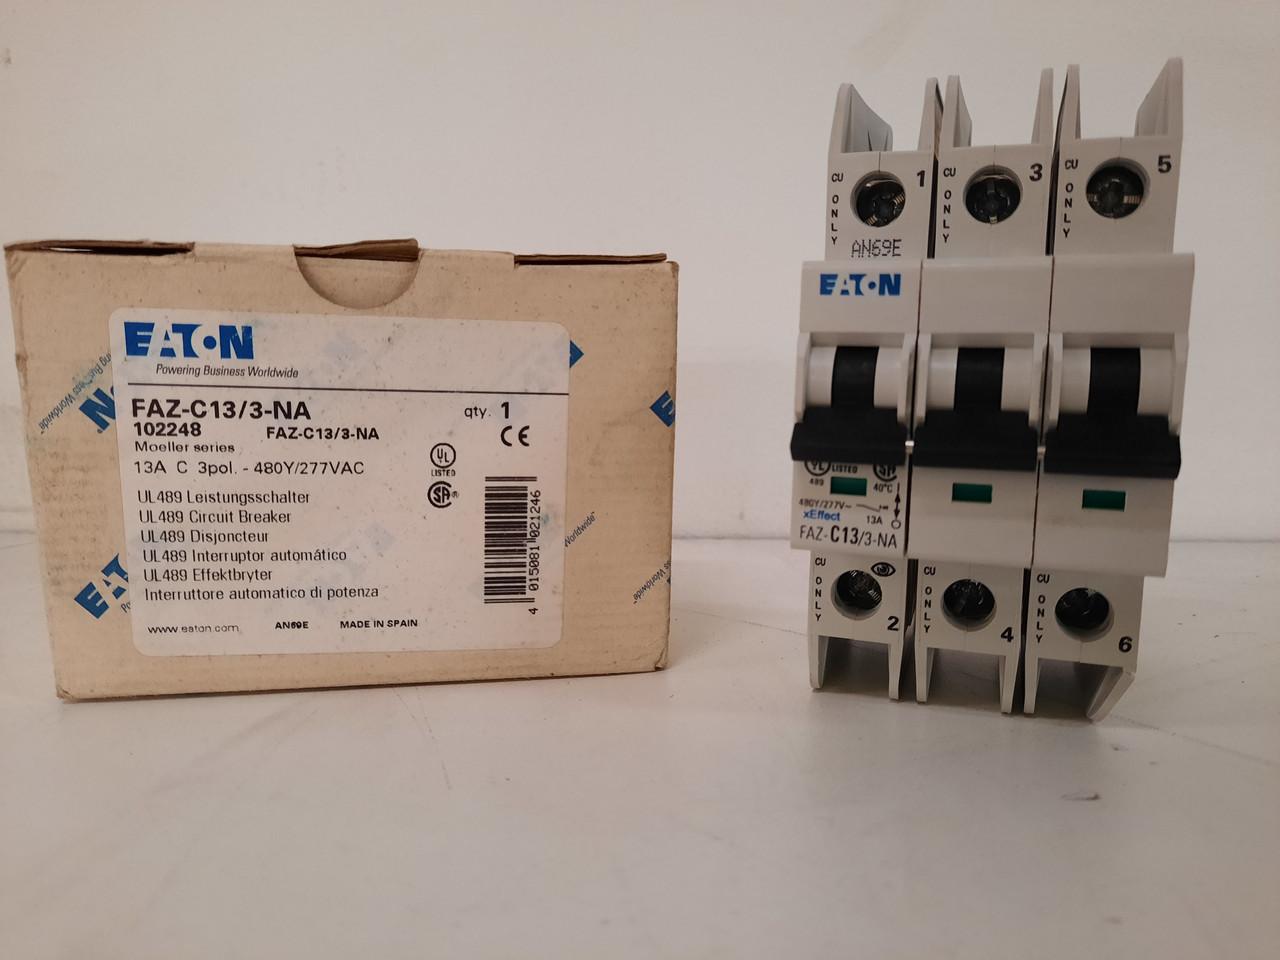 Eaton FAZ-C13/3-NA 277/480 VAC 50/60 Hz, 13 A, 3-Pole, 10/14 kA, 5 to 10 x Rated Current, Screw Terminal, DIN Rail Mount, Standard Packaging, C-Curve, Current Limiting, Thermal Magnetic